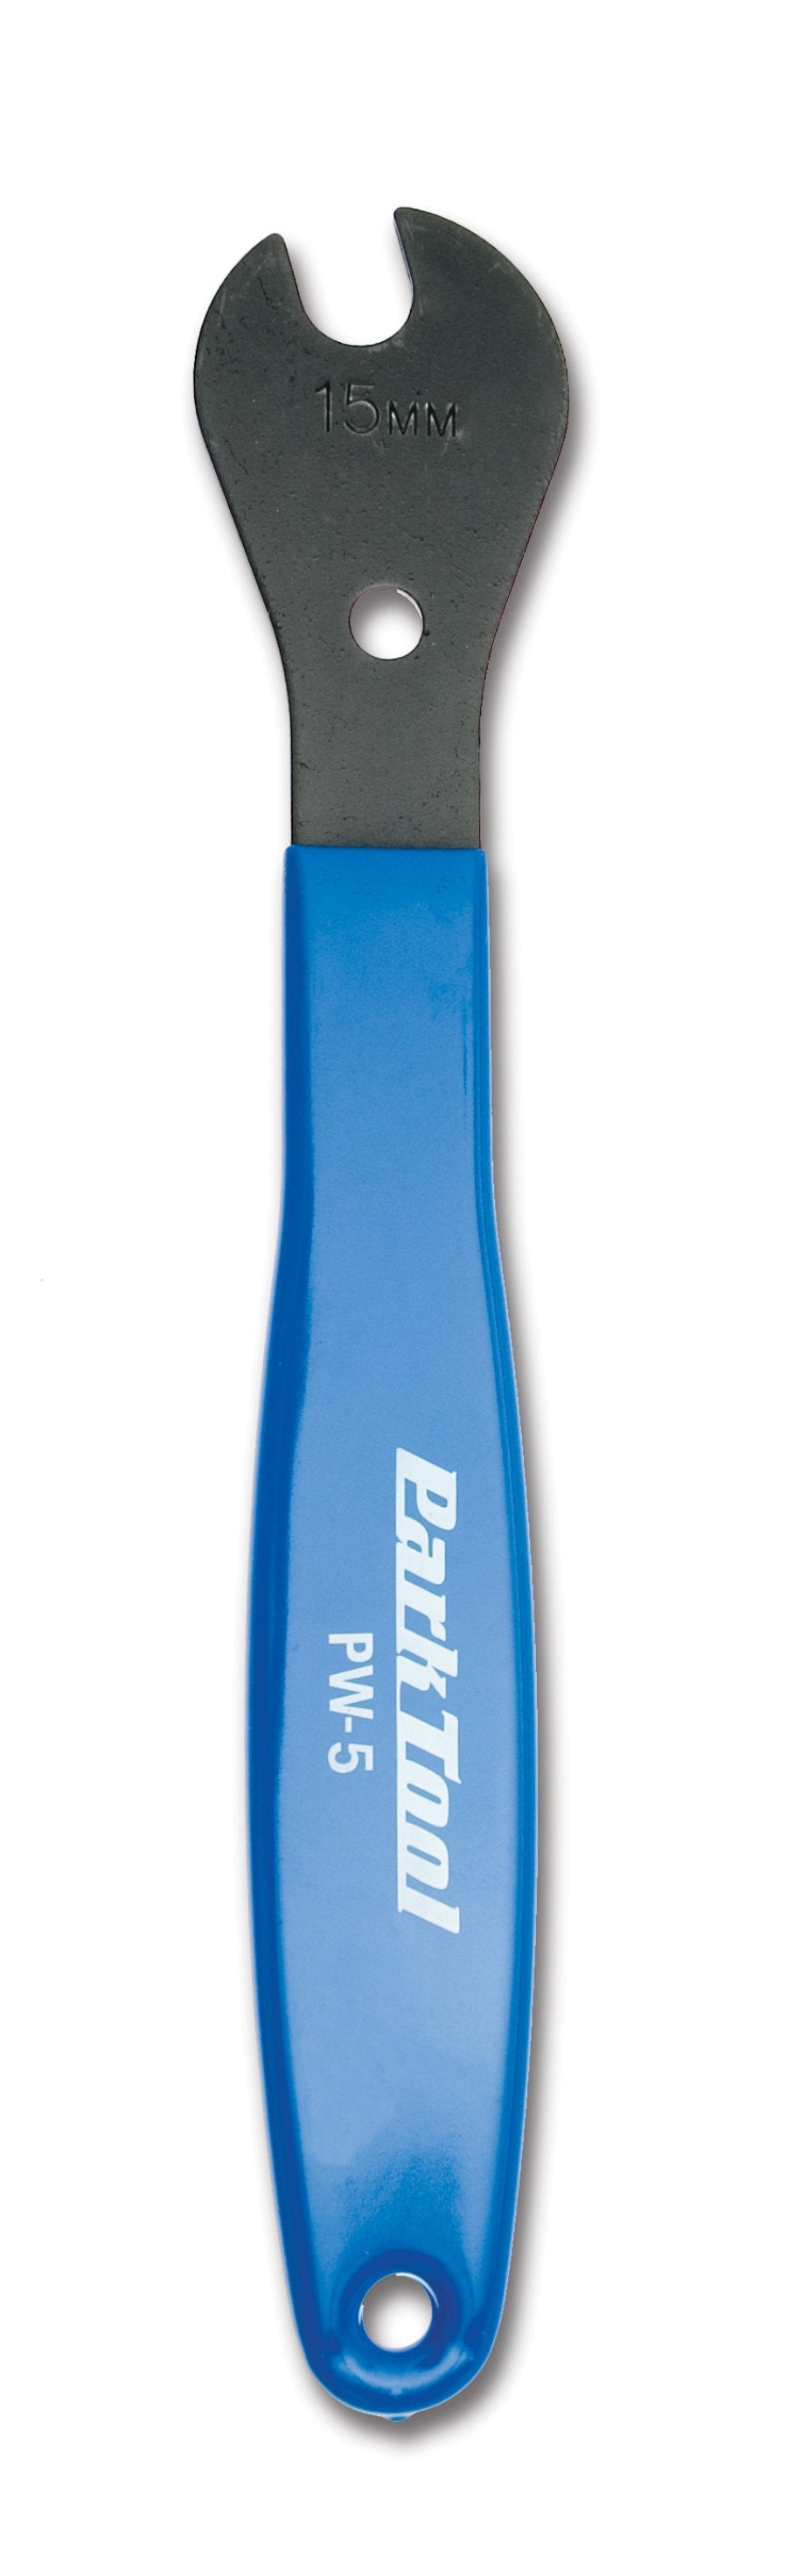 Park Tool Home Mechanic Pedal Wrench - Cyclop.in